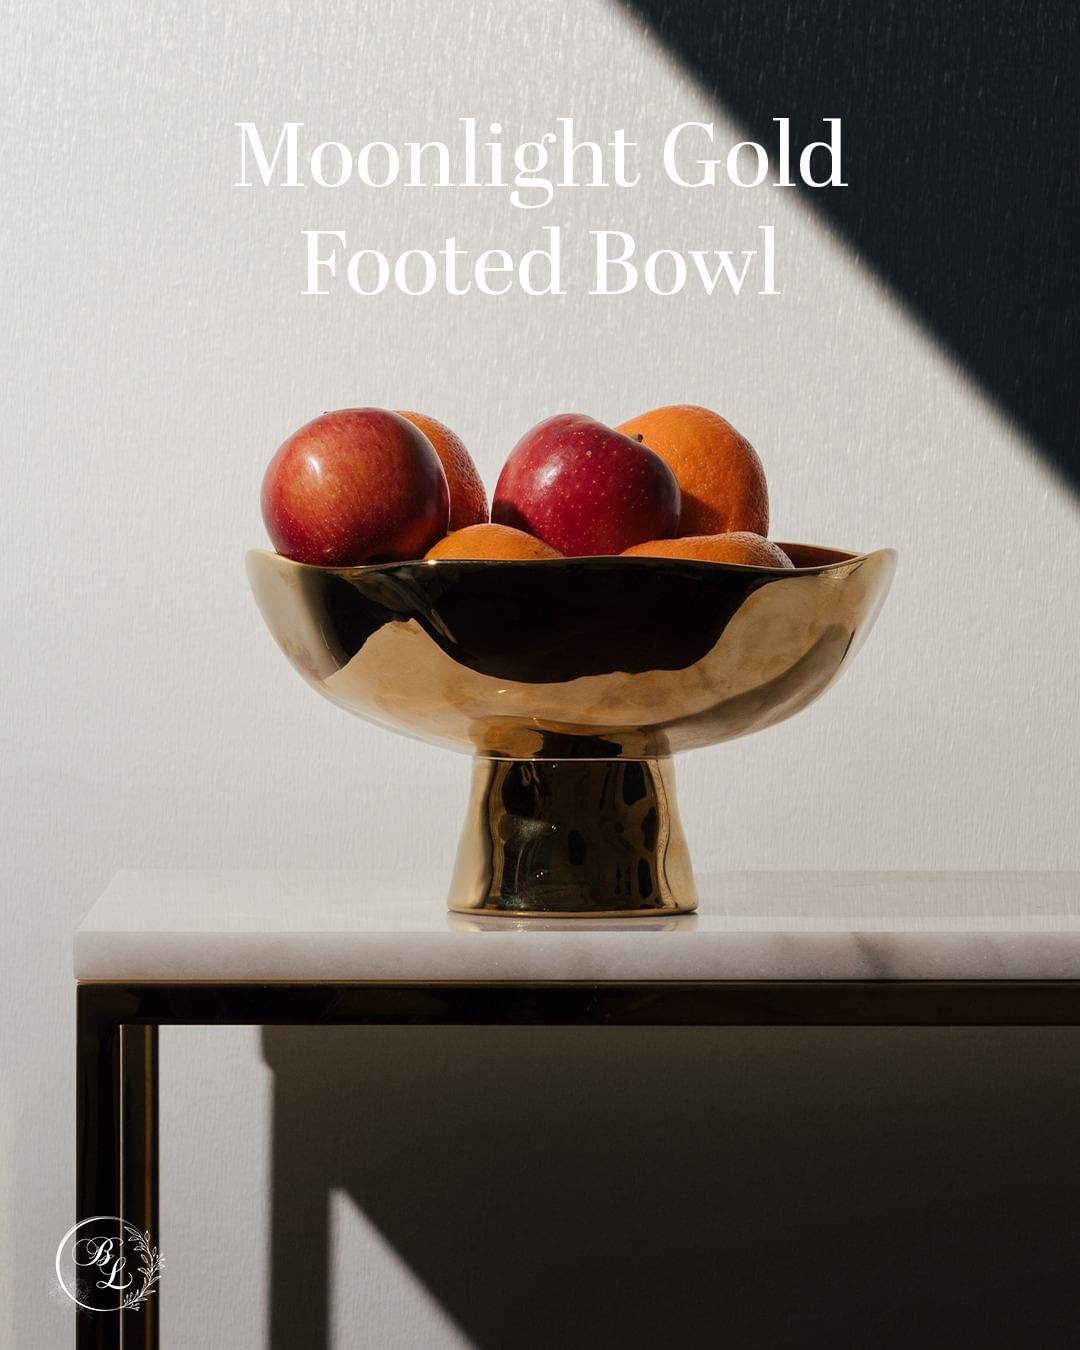 Moonlight Gold Footed Bowl